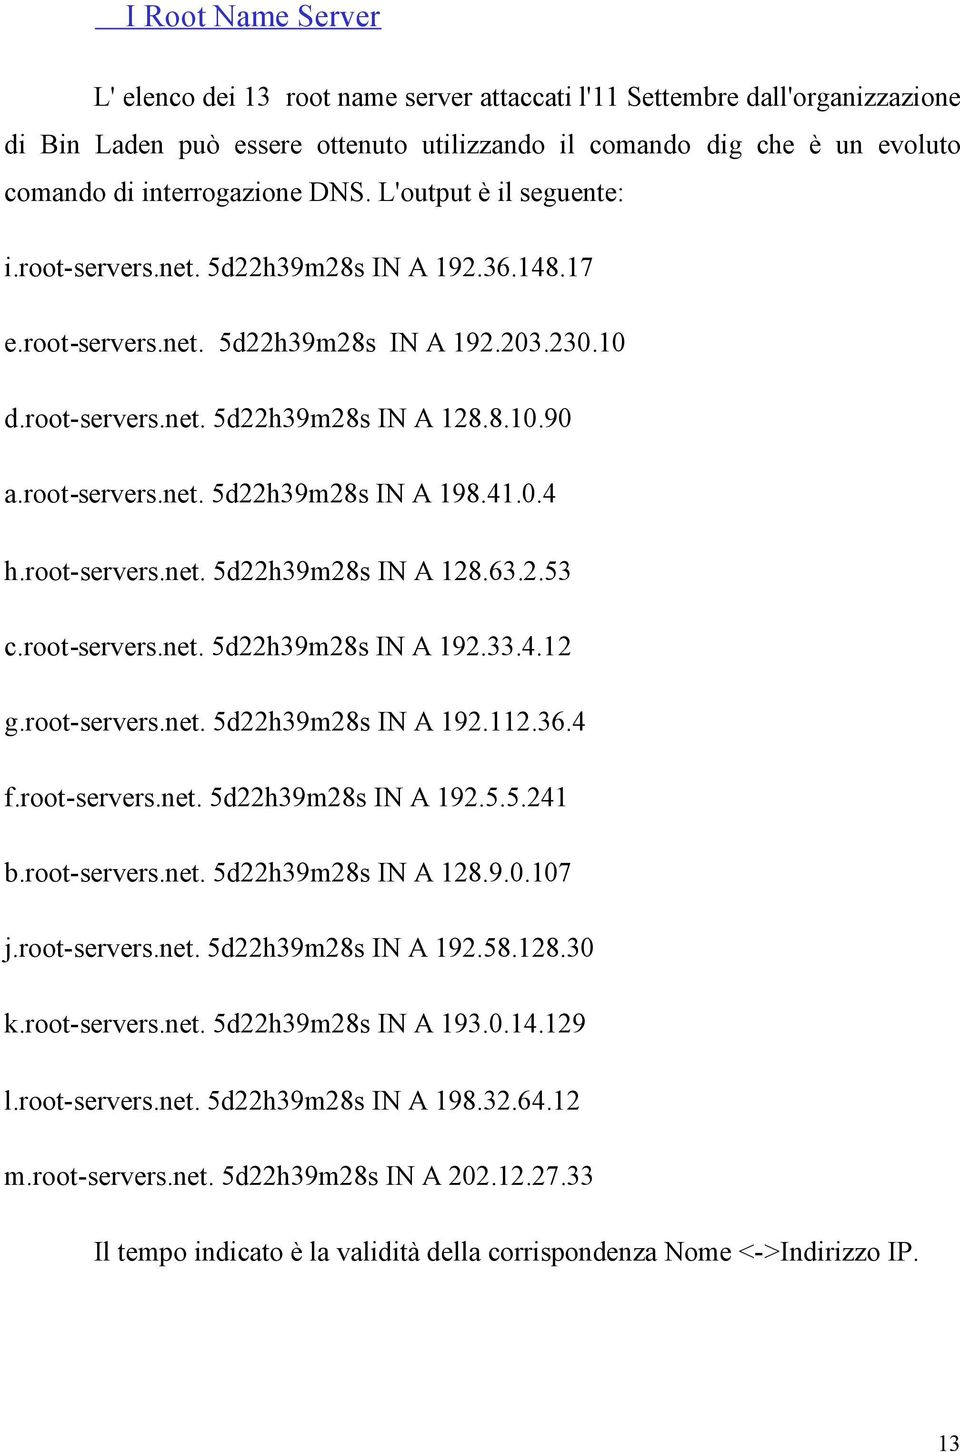 root-servers.net. 5d22h39m28s IN A 198.41.0.4 h.root-servers.net. 5d22h39m28s IN A 128.63.2.53 c.root-servers.net. 5d22h39m28s IN A 192.33.4.12 g.root-servers.net. 5d22h39m28s IN A 192.112.36.4 f.